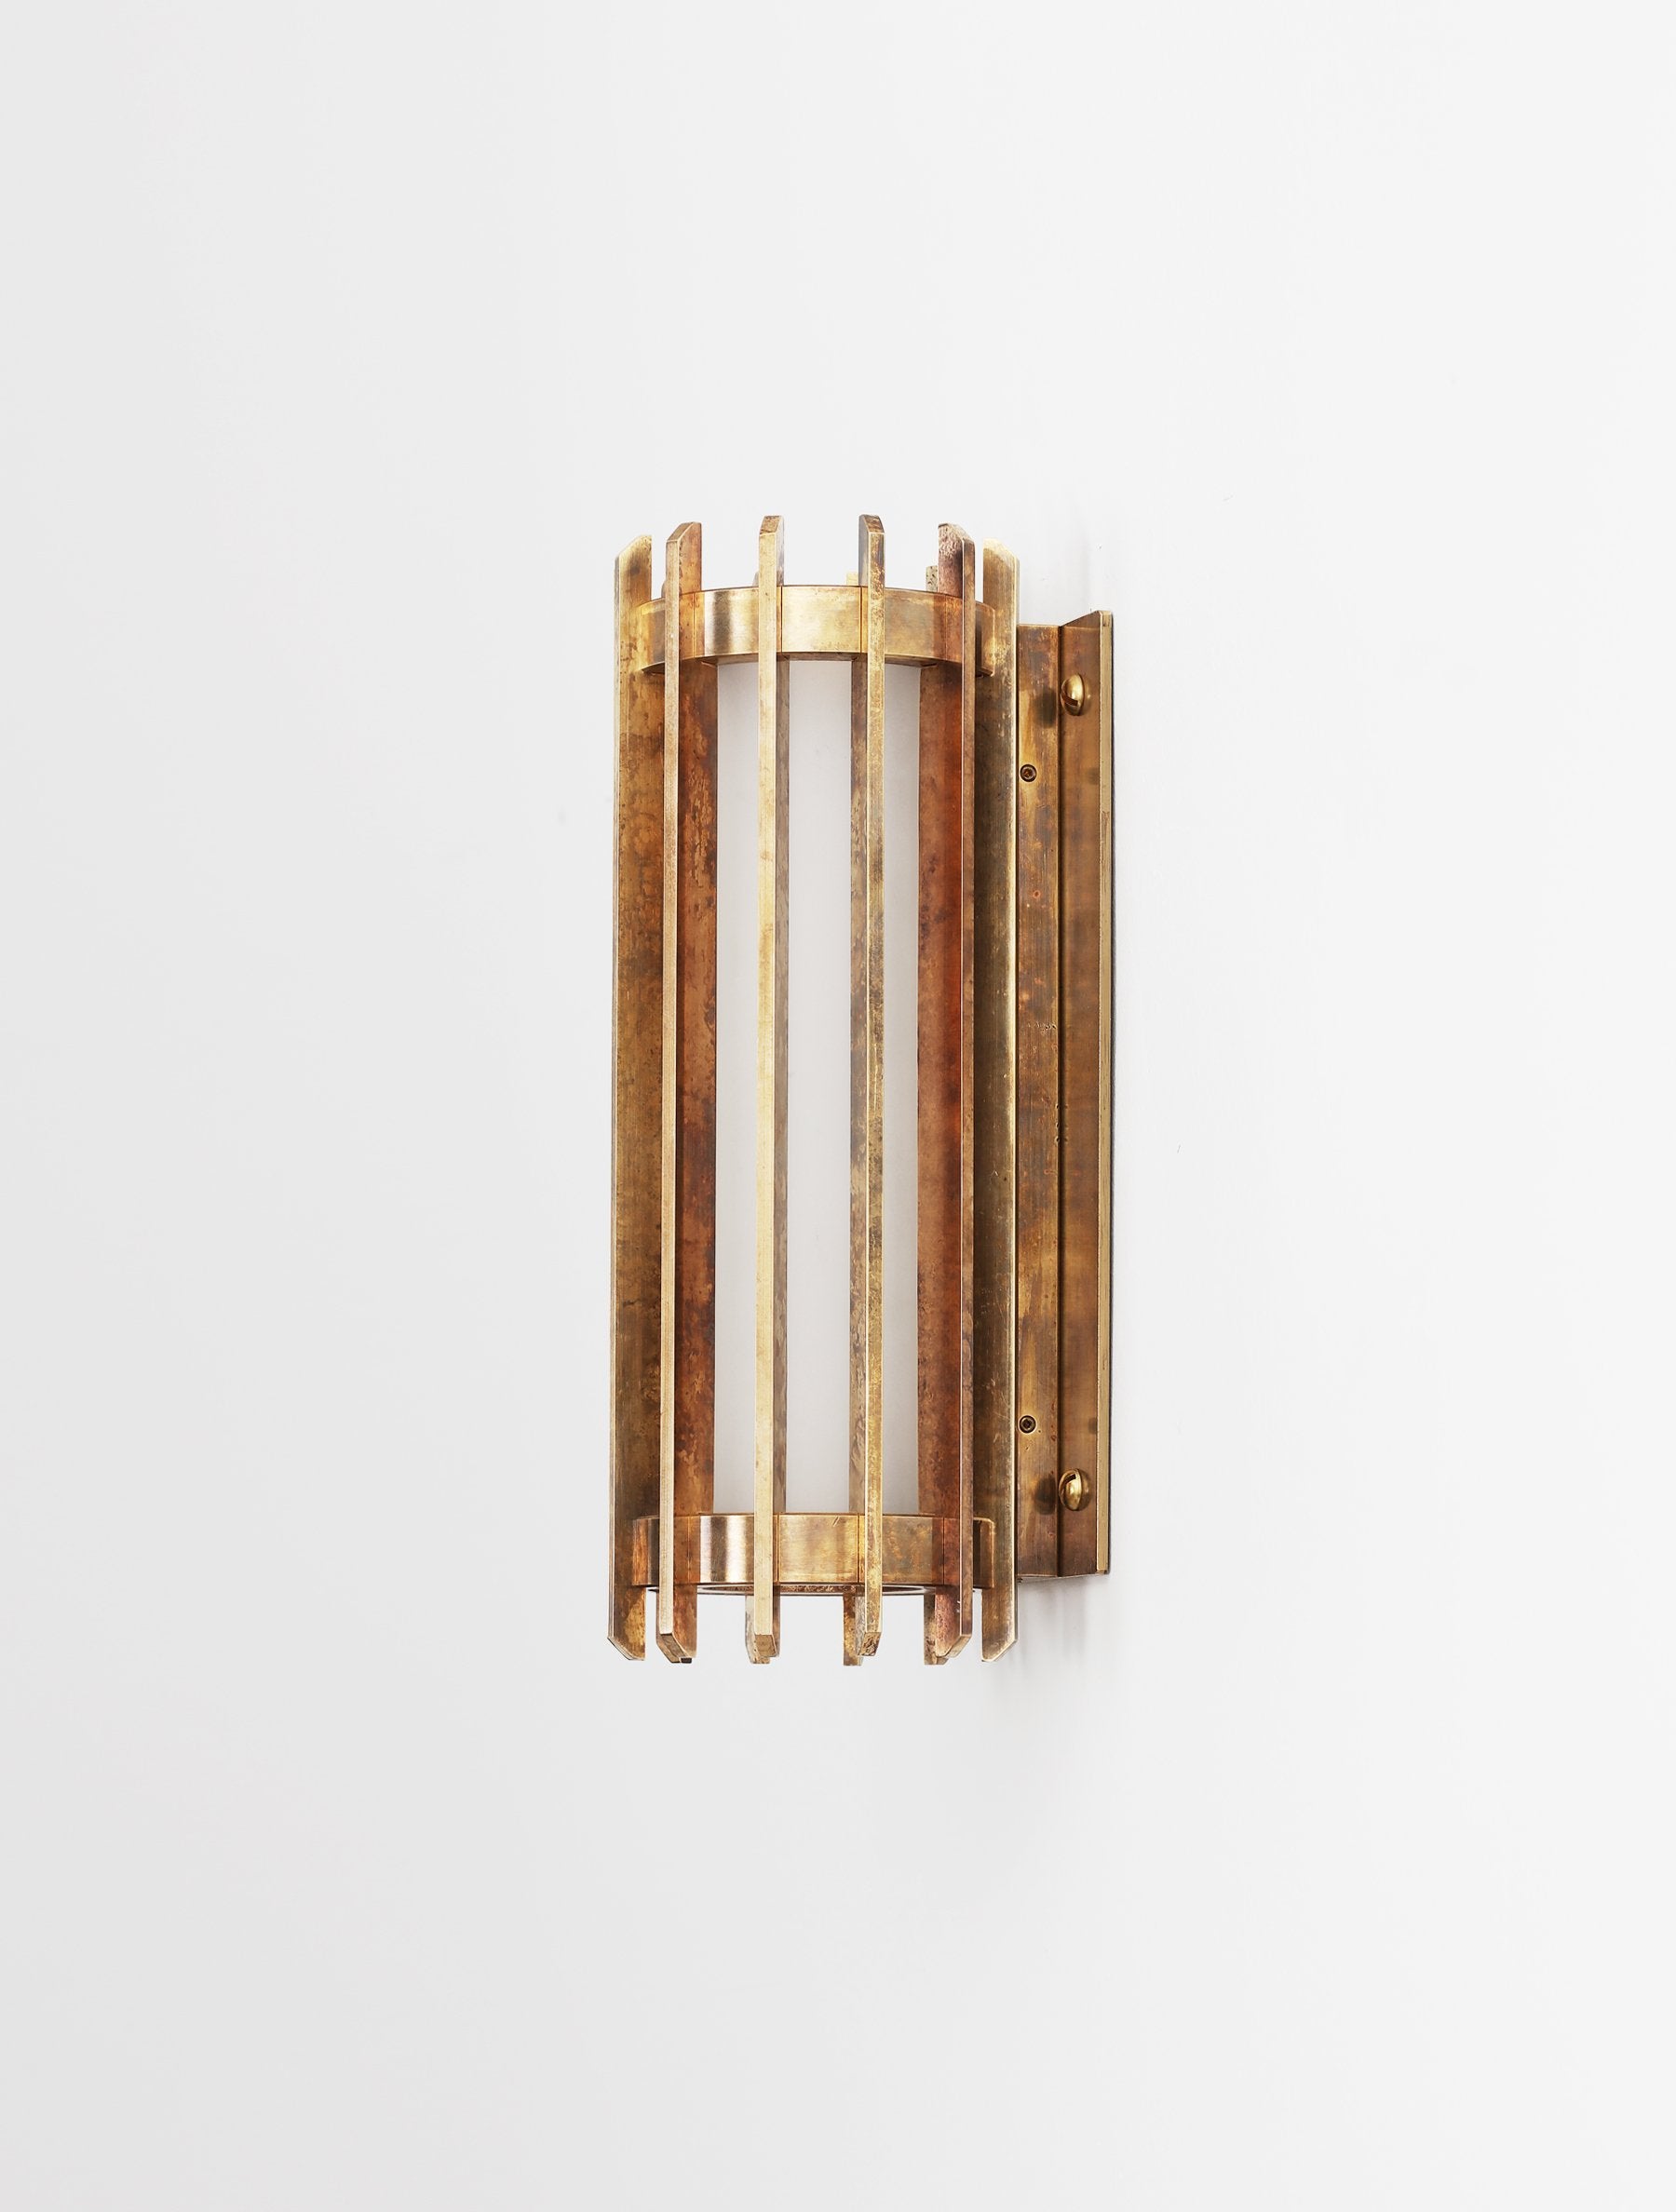 Cathedral Sconce 12"